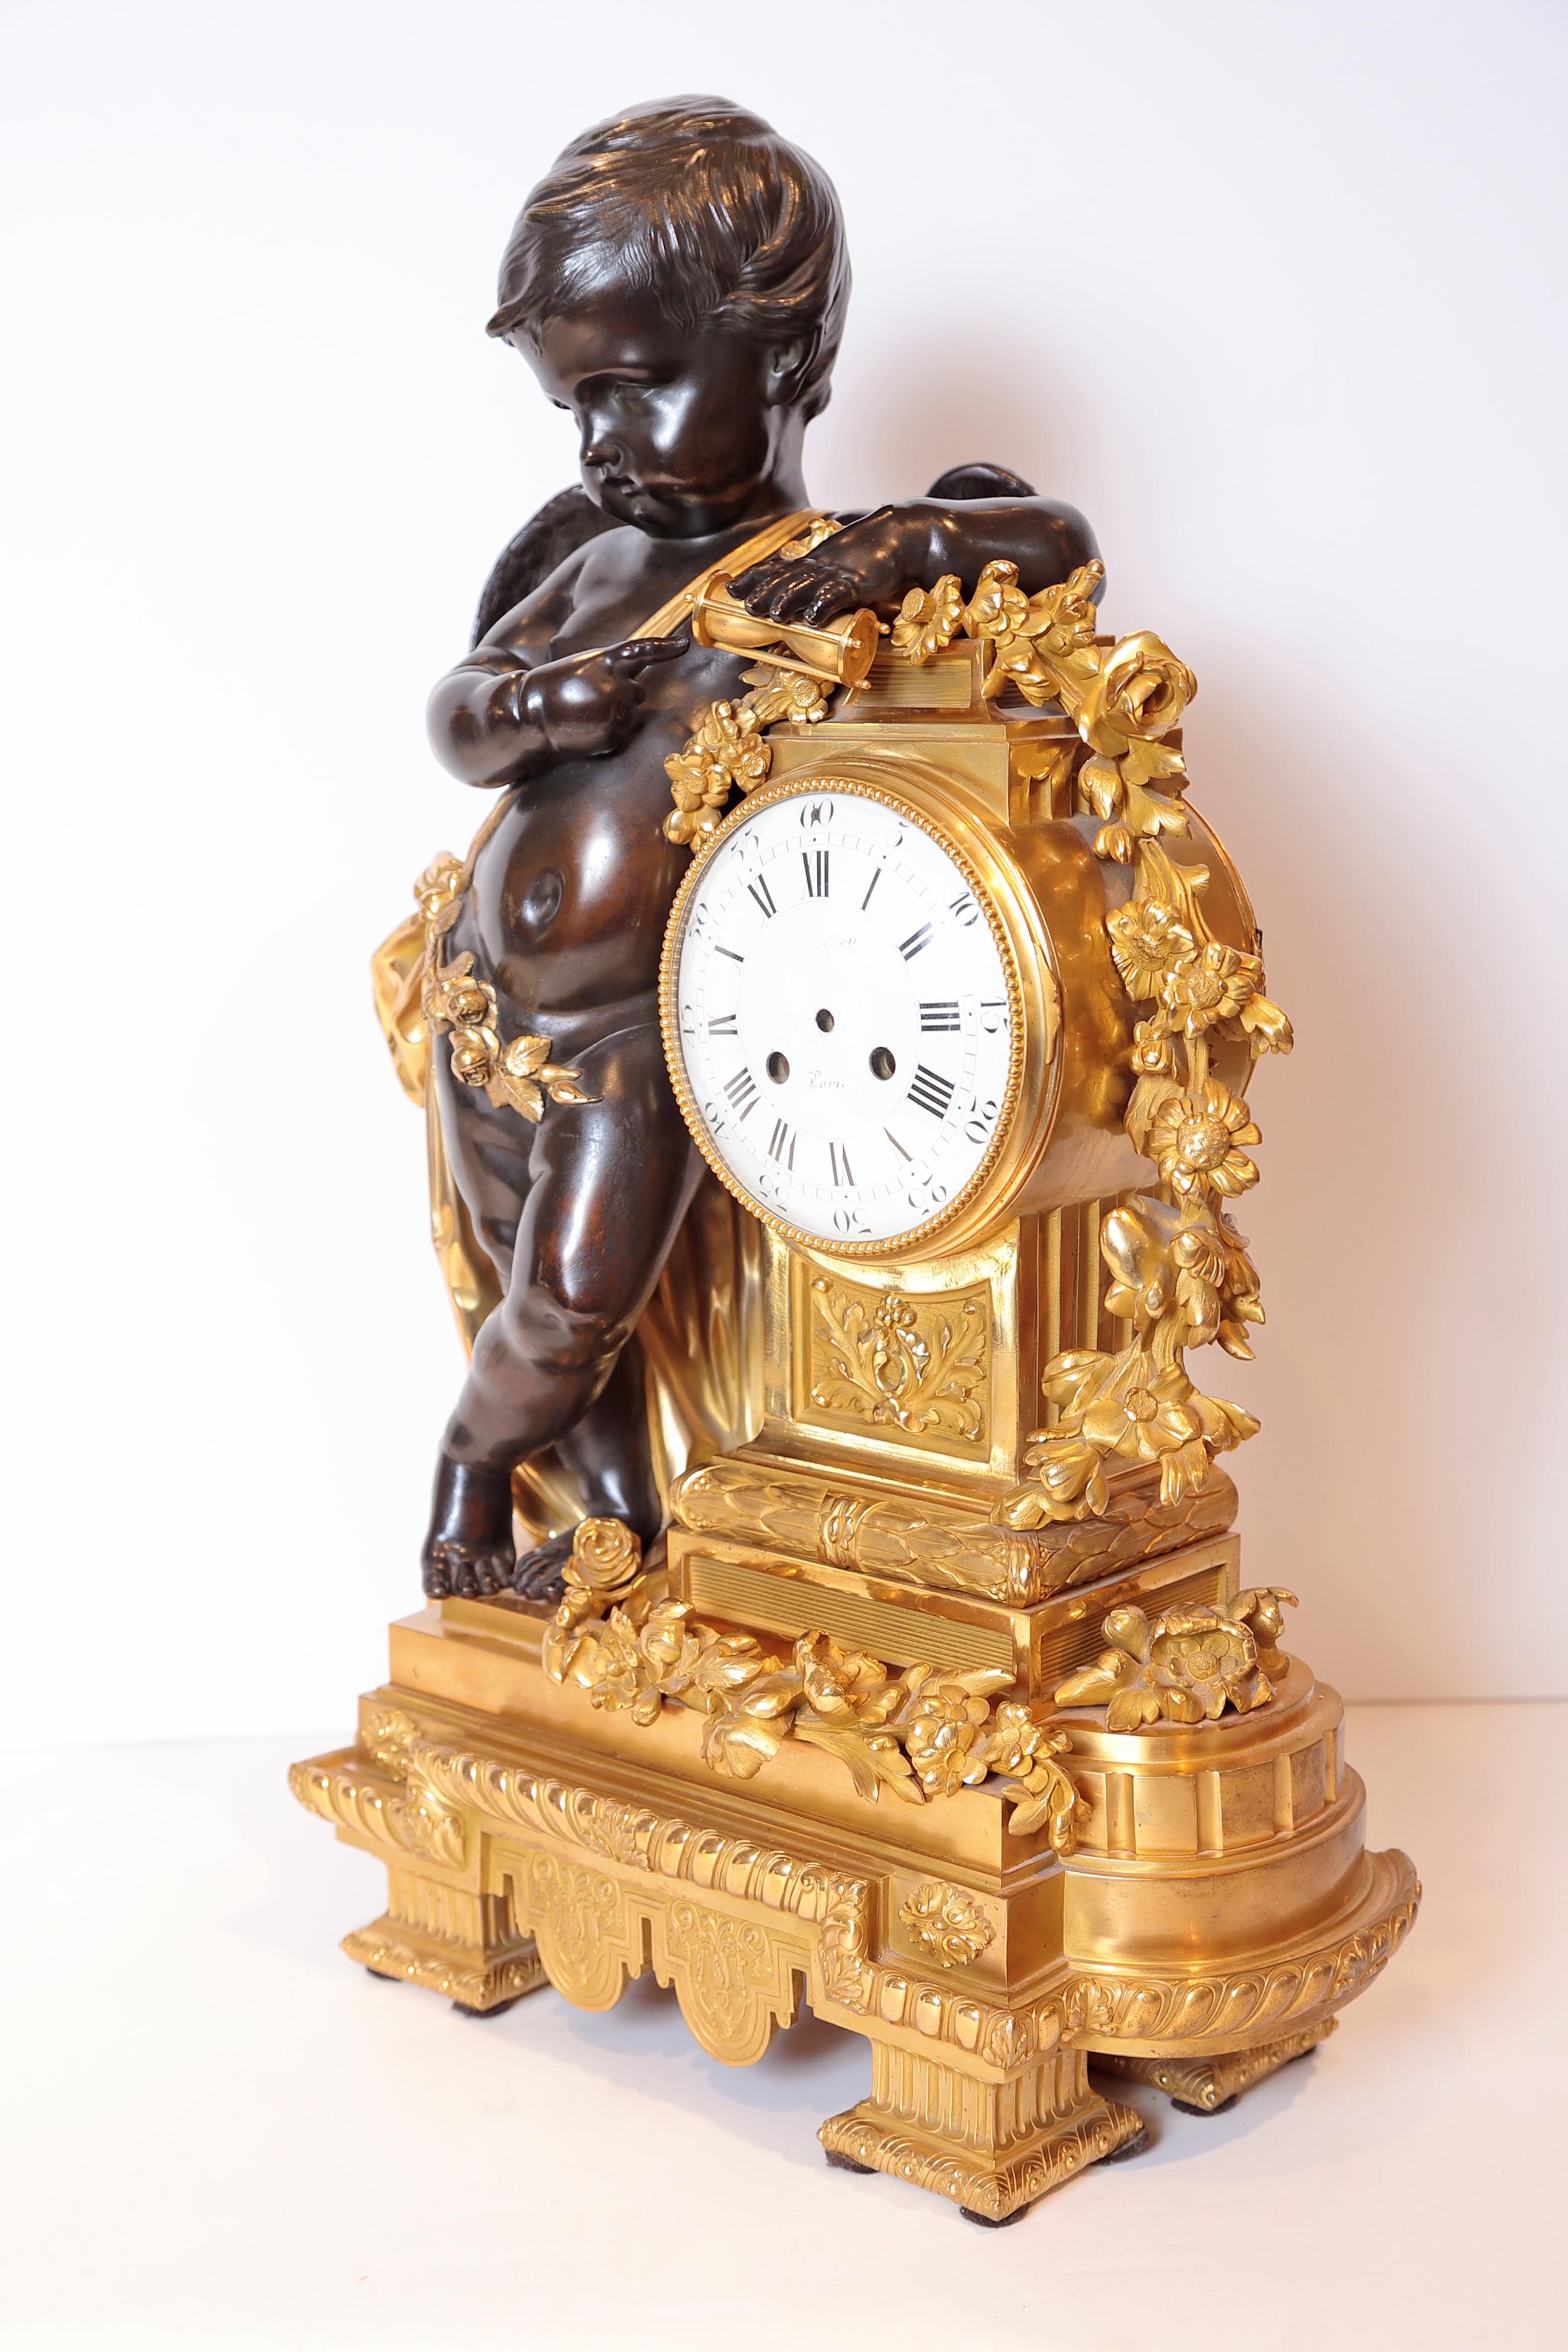 Museum quality highlighting a patinated bronze winged putti holding an hour glass, and dressed in a knotted sash with rose garland. The exquisite doré bronze clock draped with meandering flower vines. The pedestal and shaped base ornately decorated